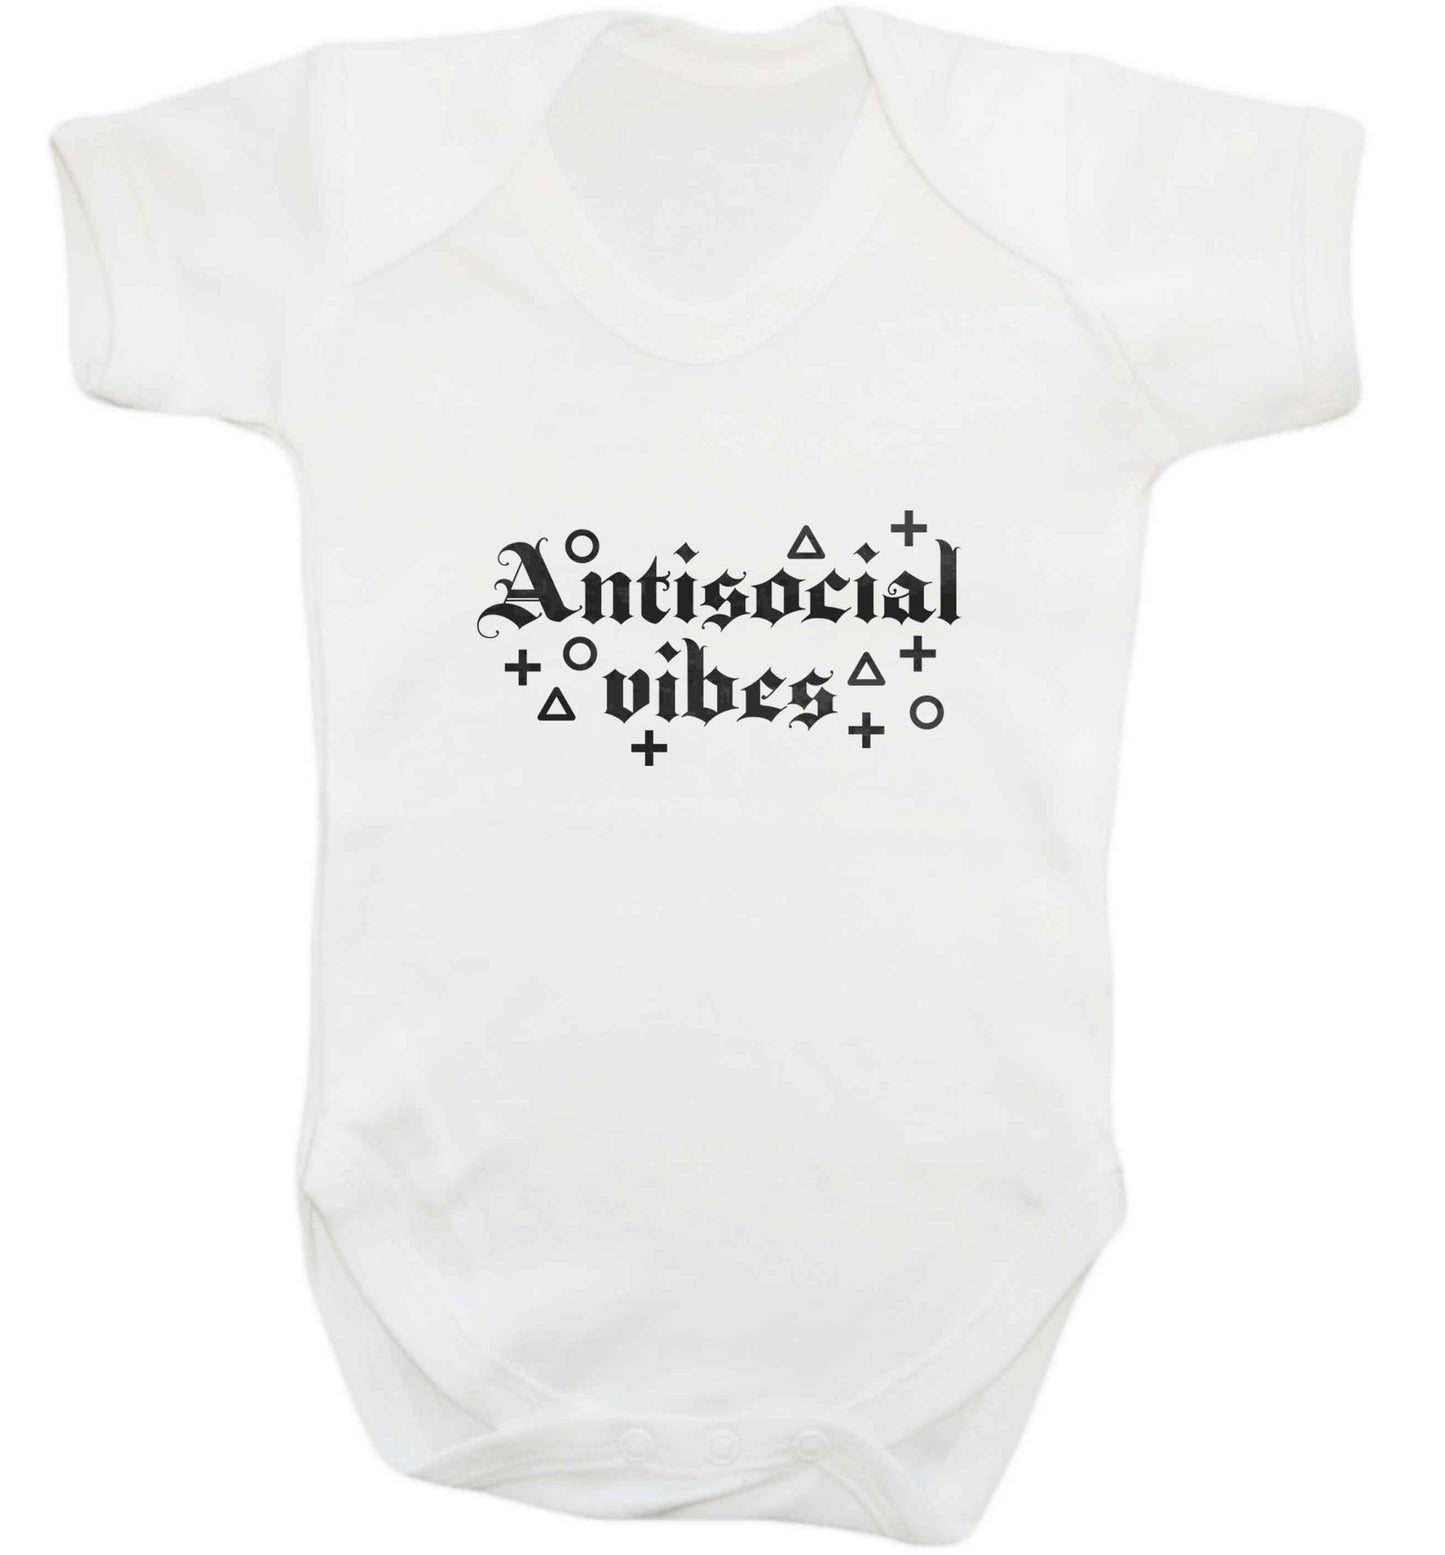 Antisocial vibes baby vest white 18-24 months